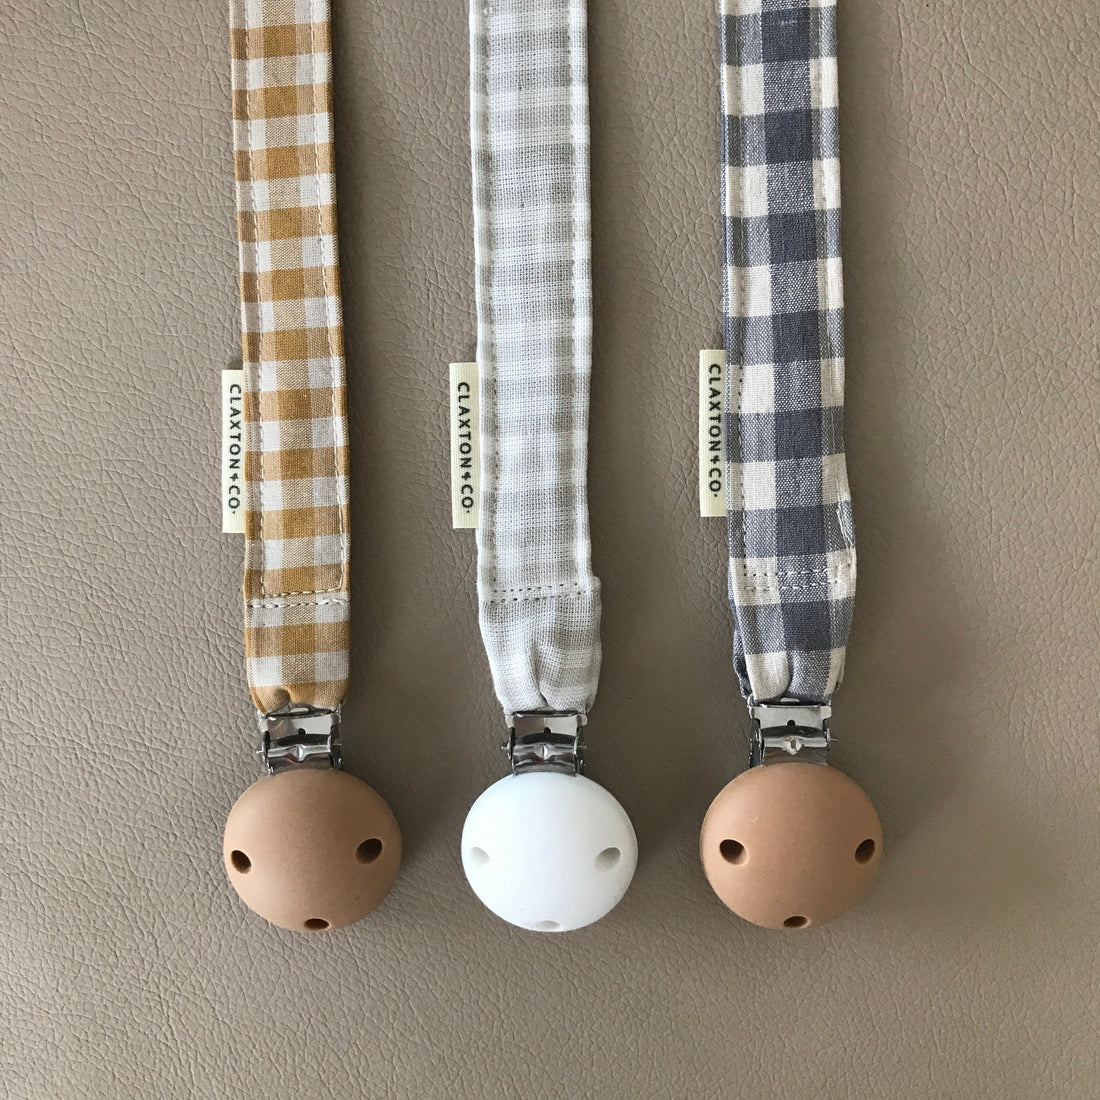 Dummy / Pacifier Strap Sewing Guide